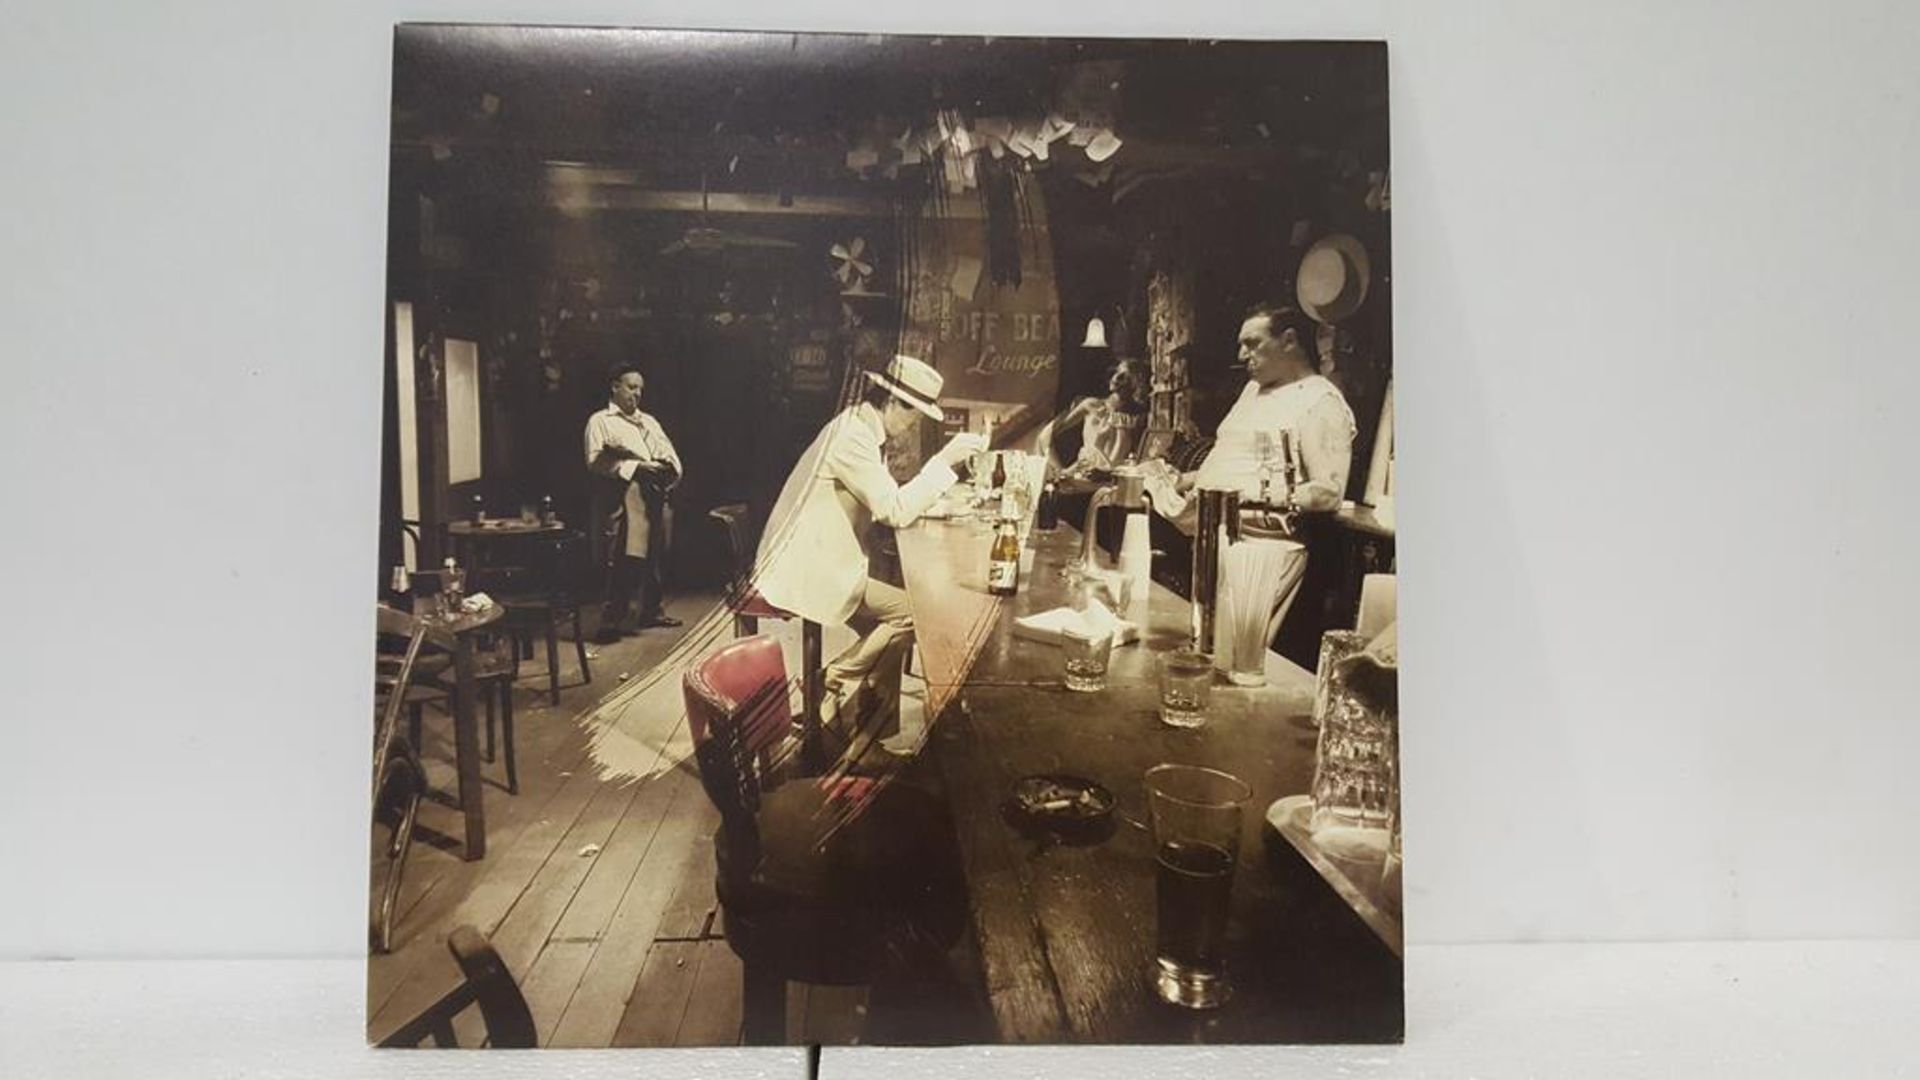 Led Zeppelin 'In Through the Out Door' LP - Image 3 of 9